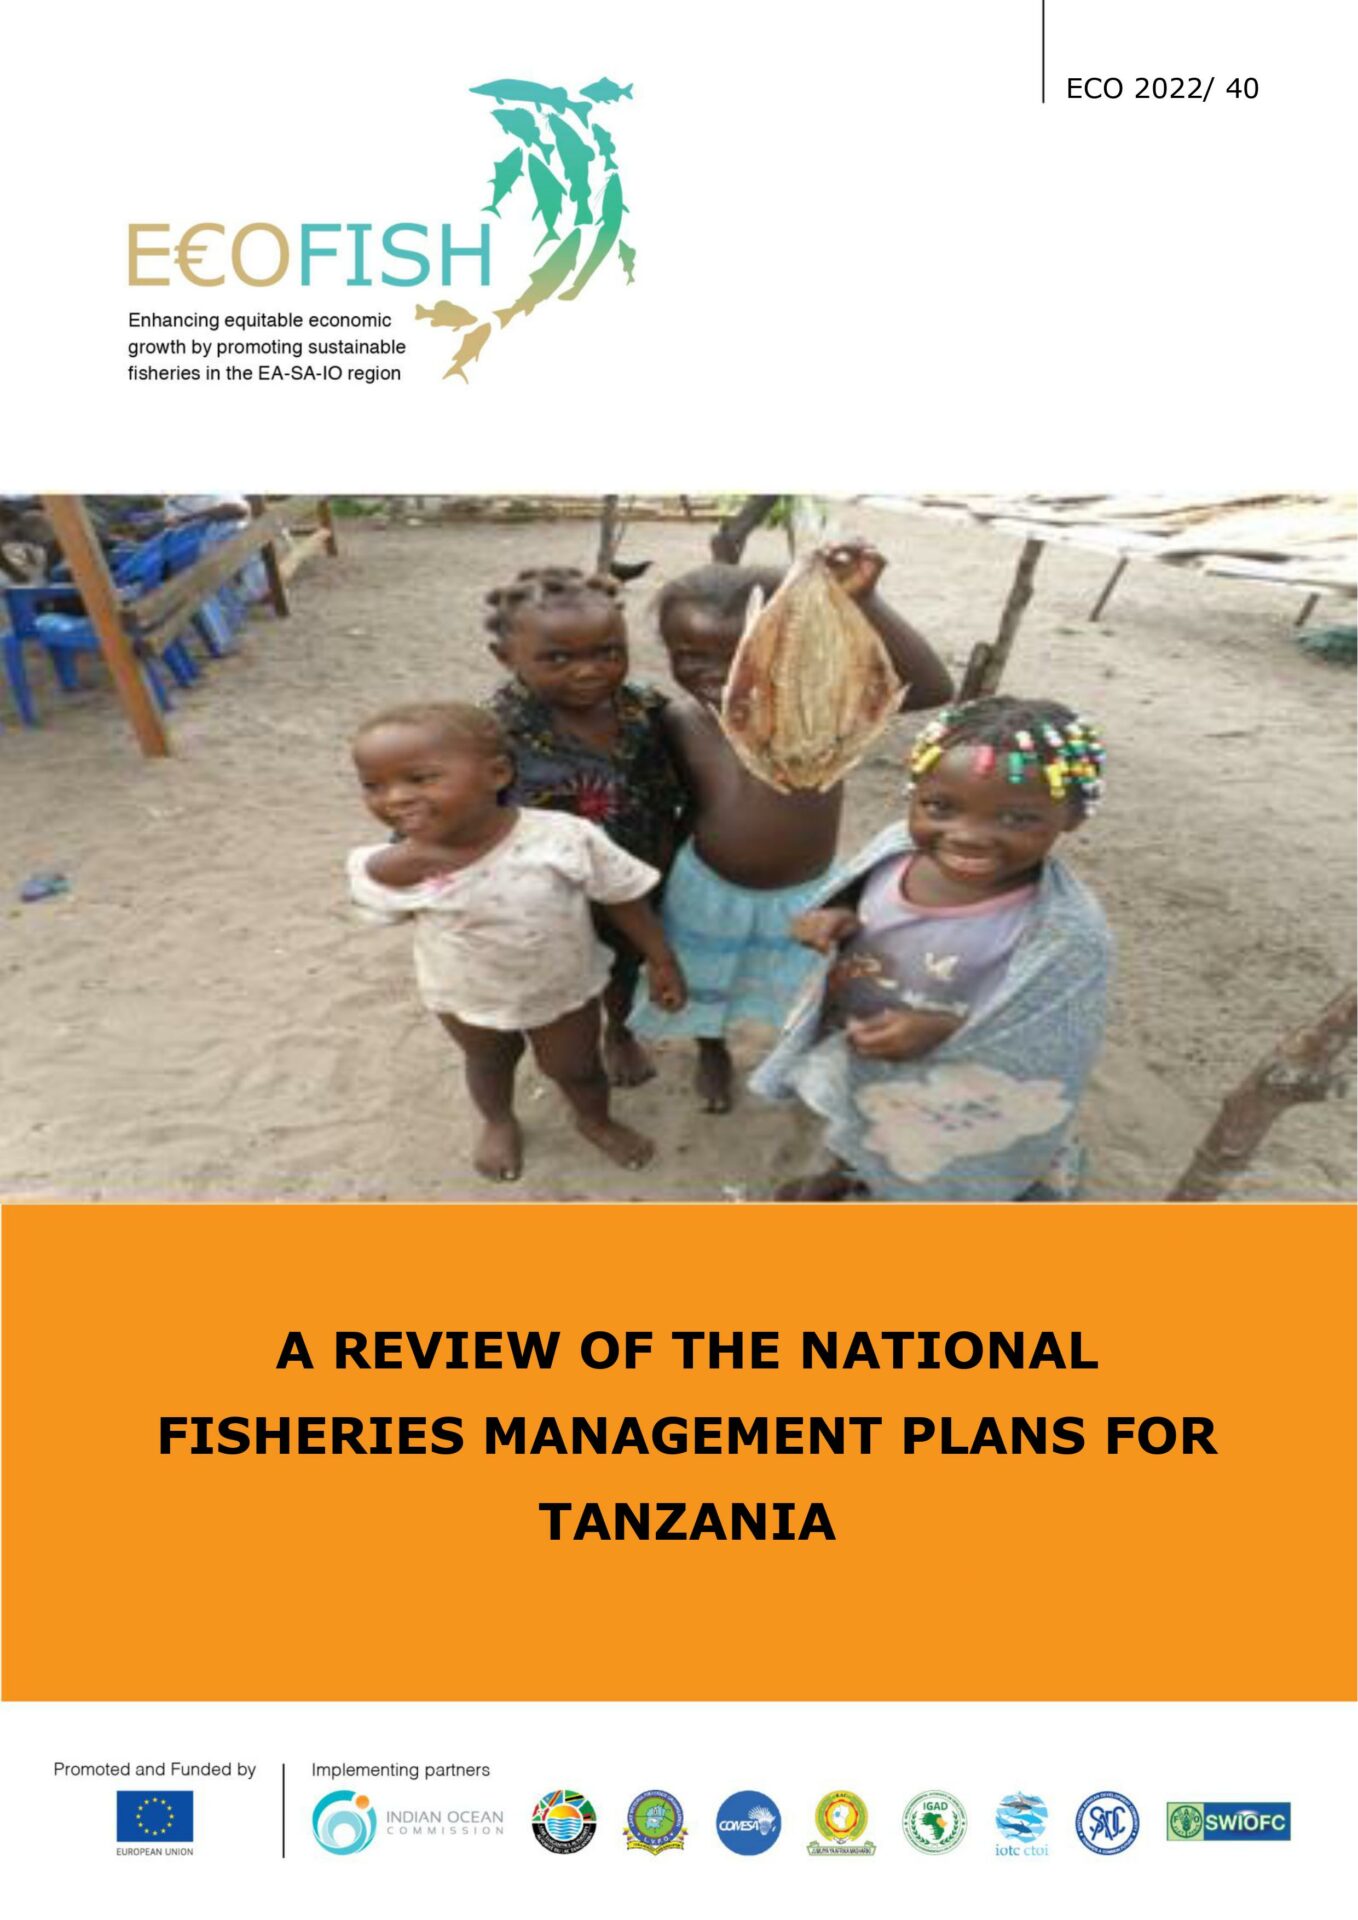 A REVIEW OF THE NATIONAL FISHERIES MANAGEMENT PLANS FOR TANZANIA